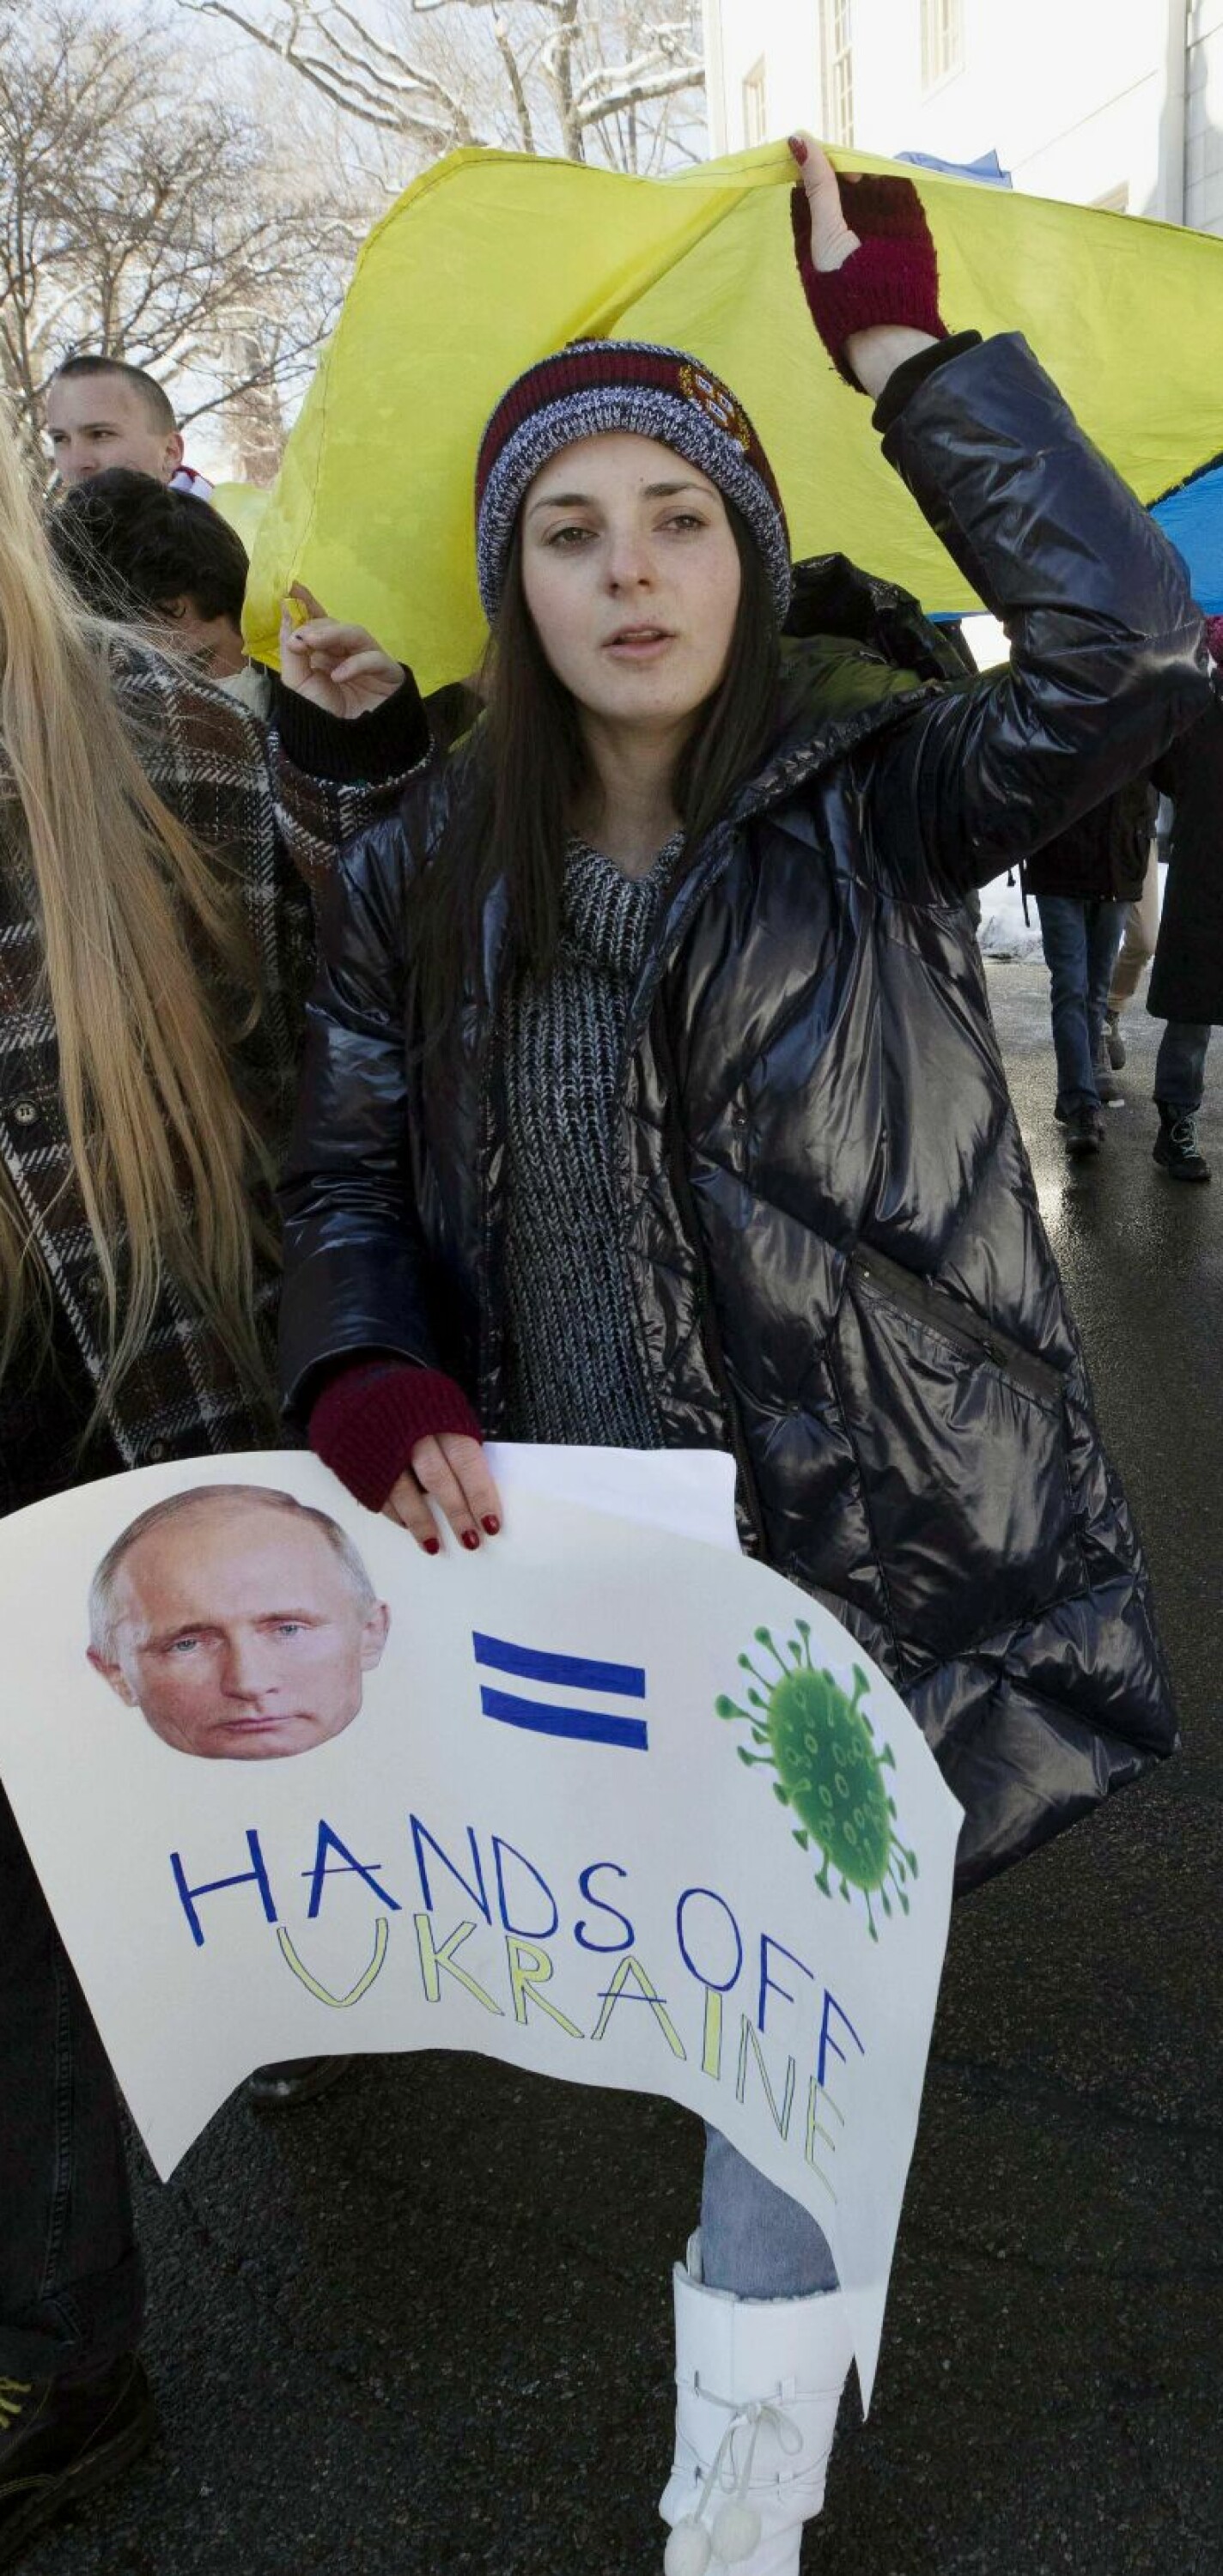 FILE - Harvard University student Nika Rudenko, second from right, marches on campus in support of Ukraine, Saturday, Feb. 26, 2022, in Cambridge, Mass. (AP Photo/Michael Dwyer, File)